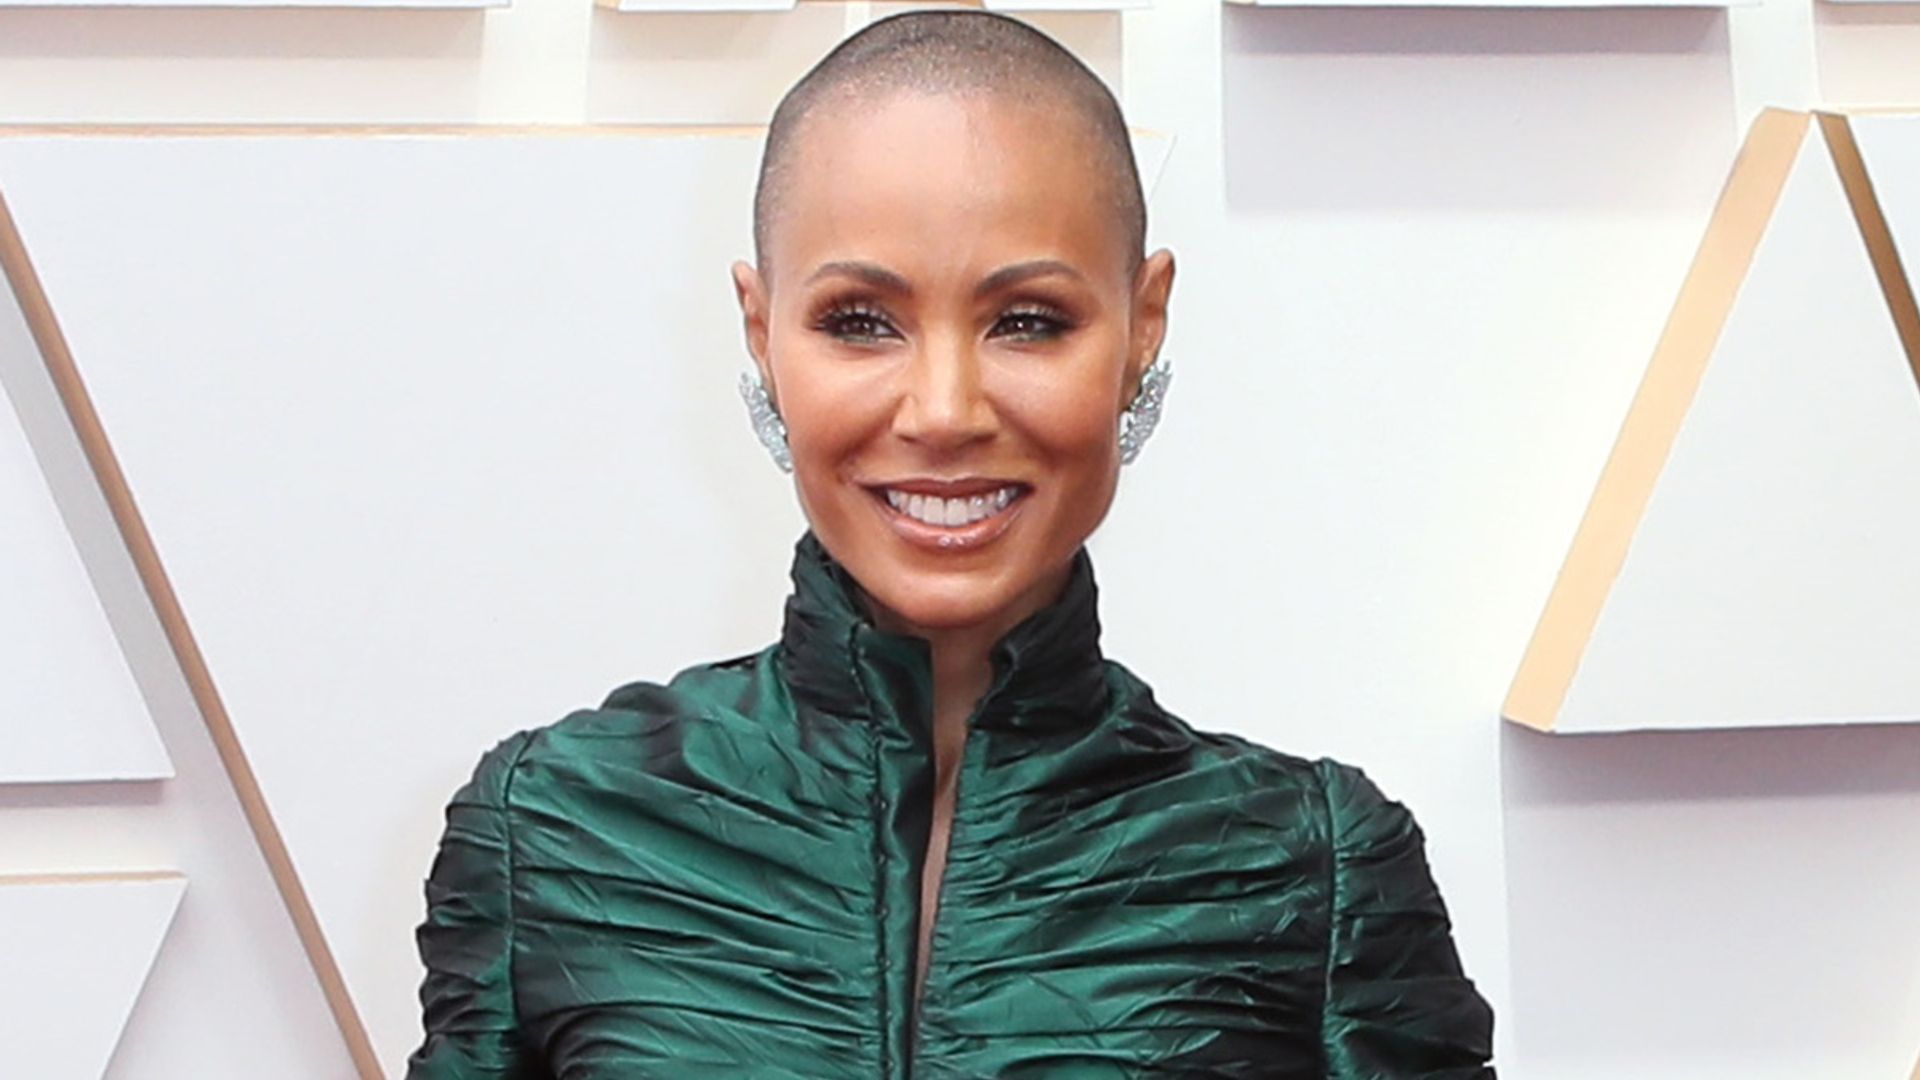 jada-pinkett-smith-is-the-picture-of-peace